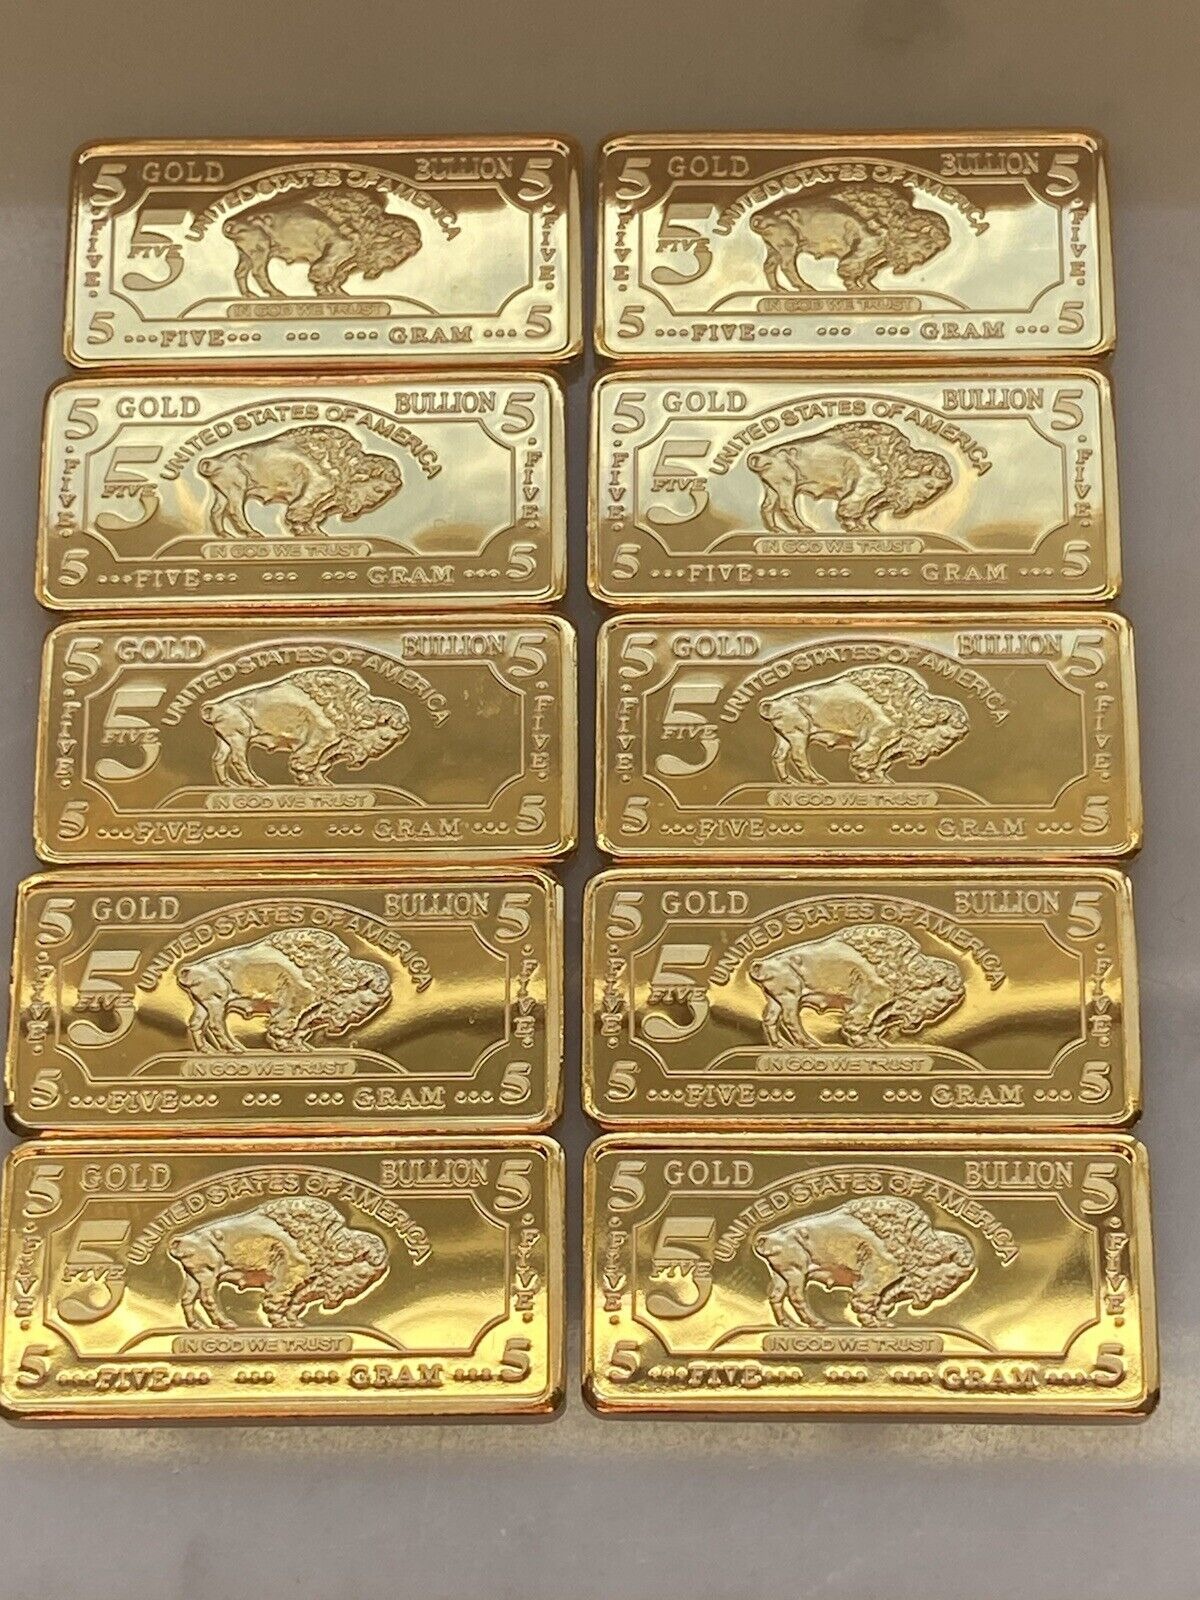 250g Gold Bars for Sale